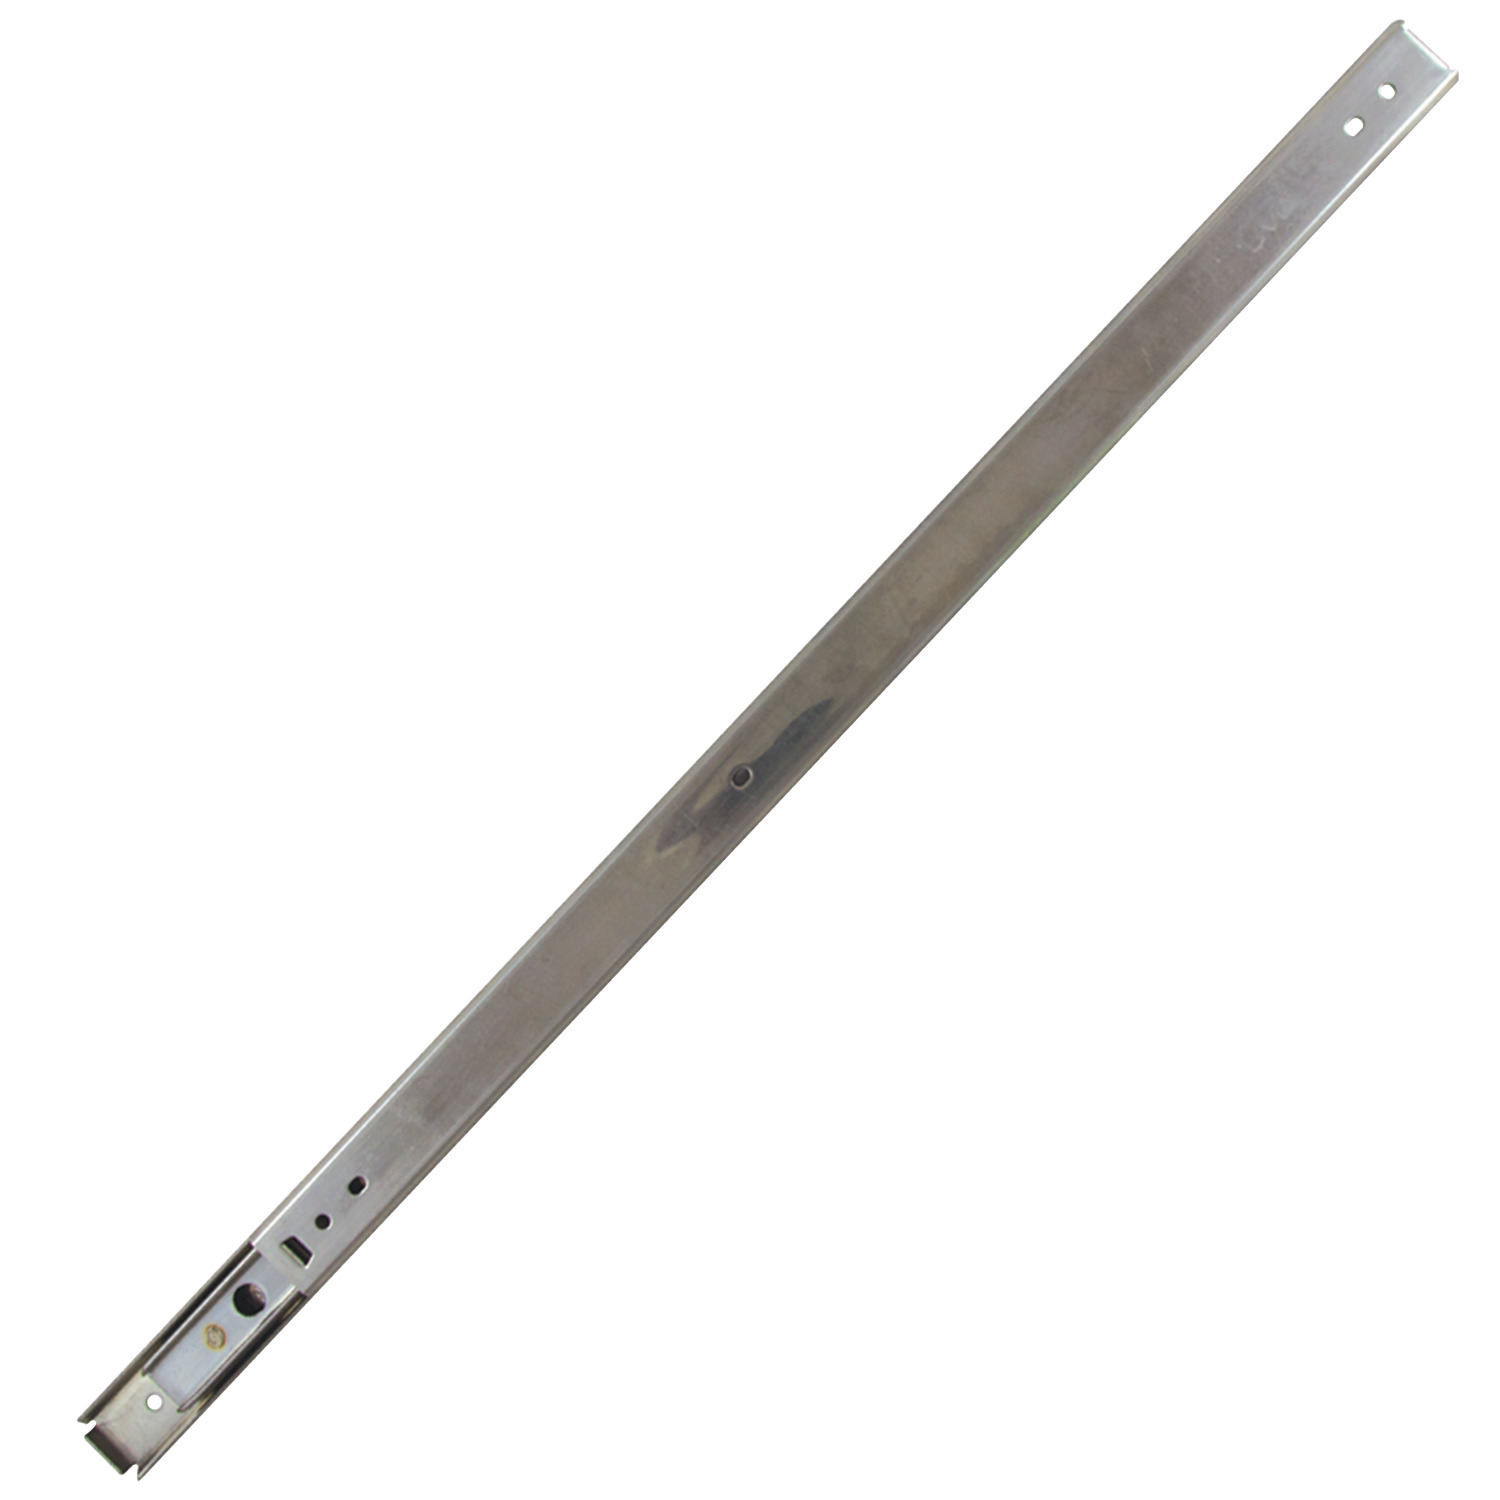 P7100.AC0350 Drawer Slide Full Extension Length 350; Load 30kg per pair. Sold Individually. Stainless